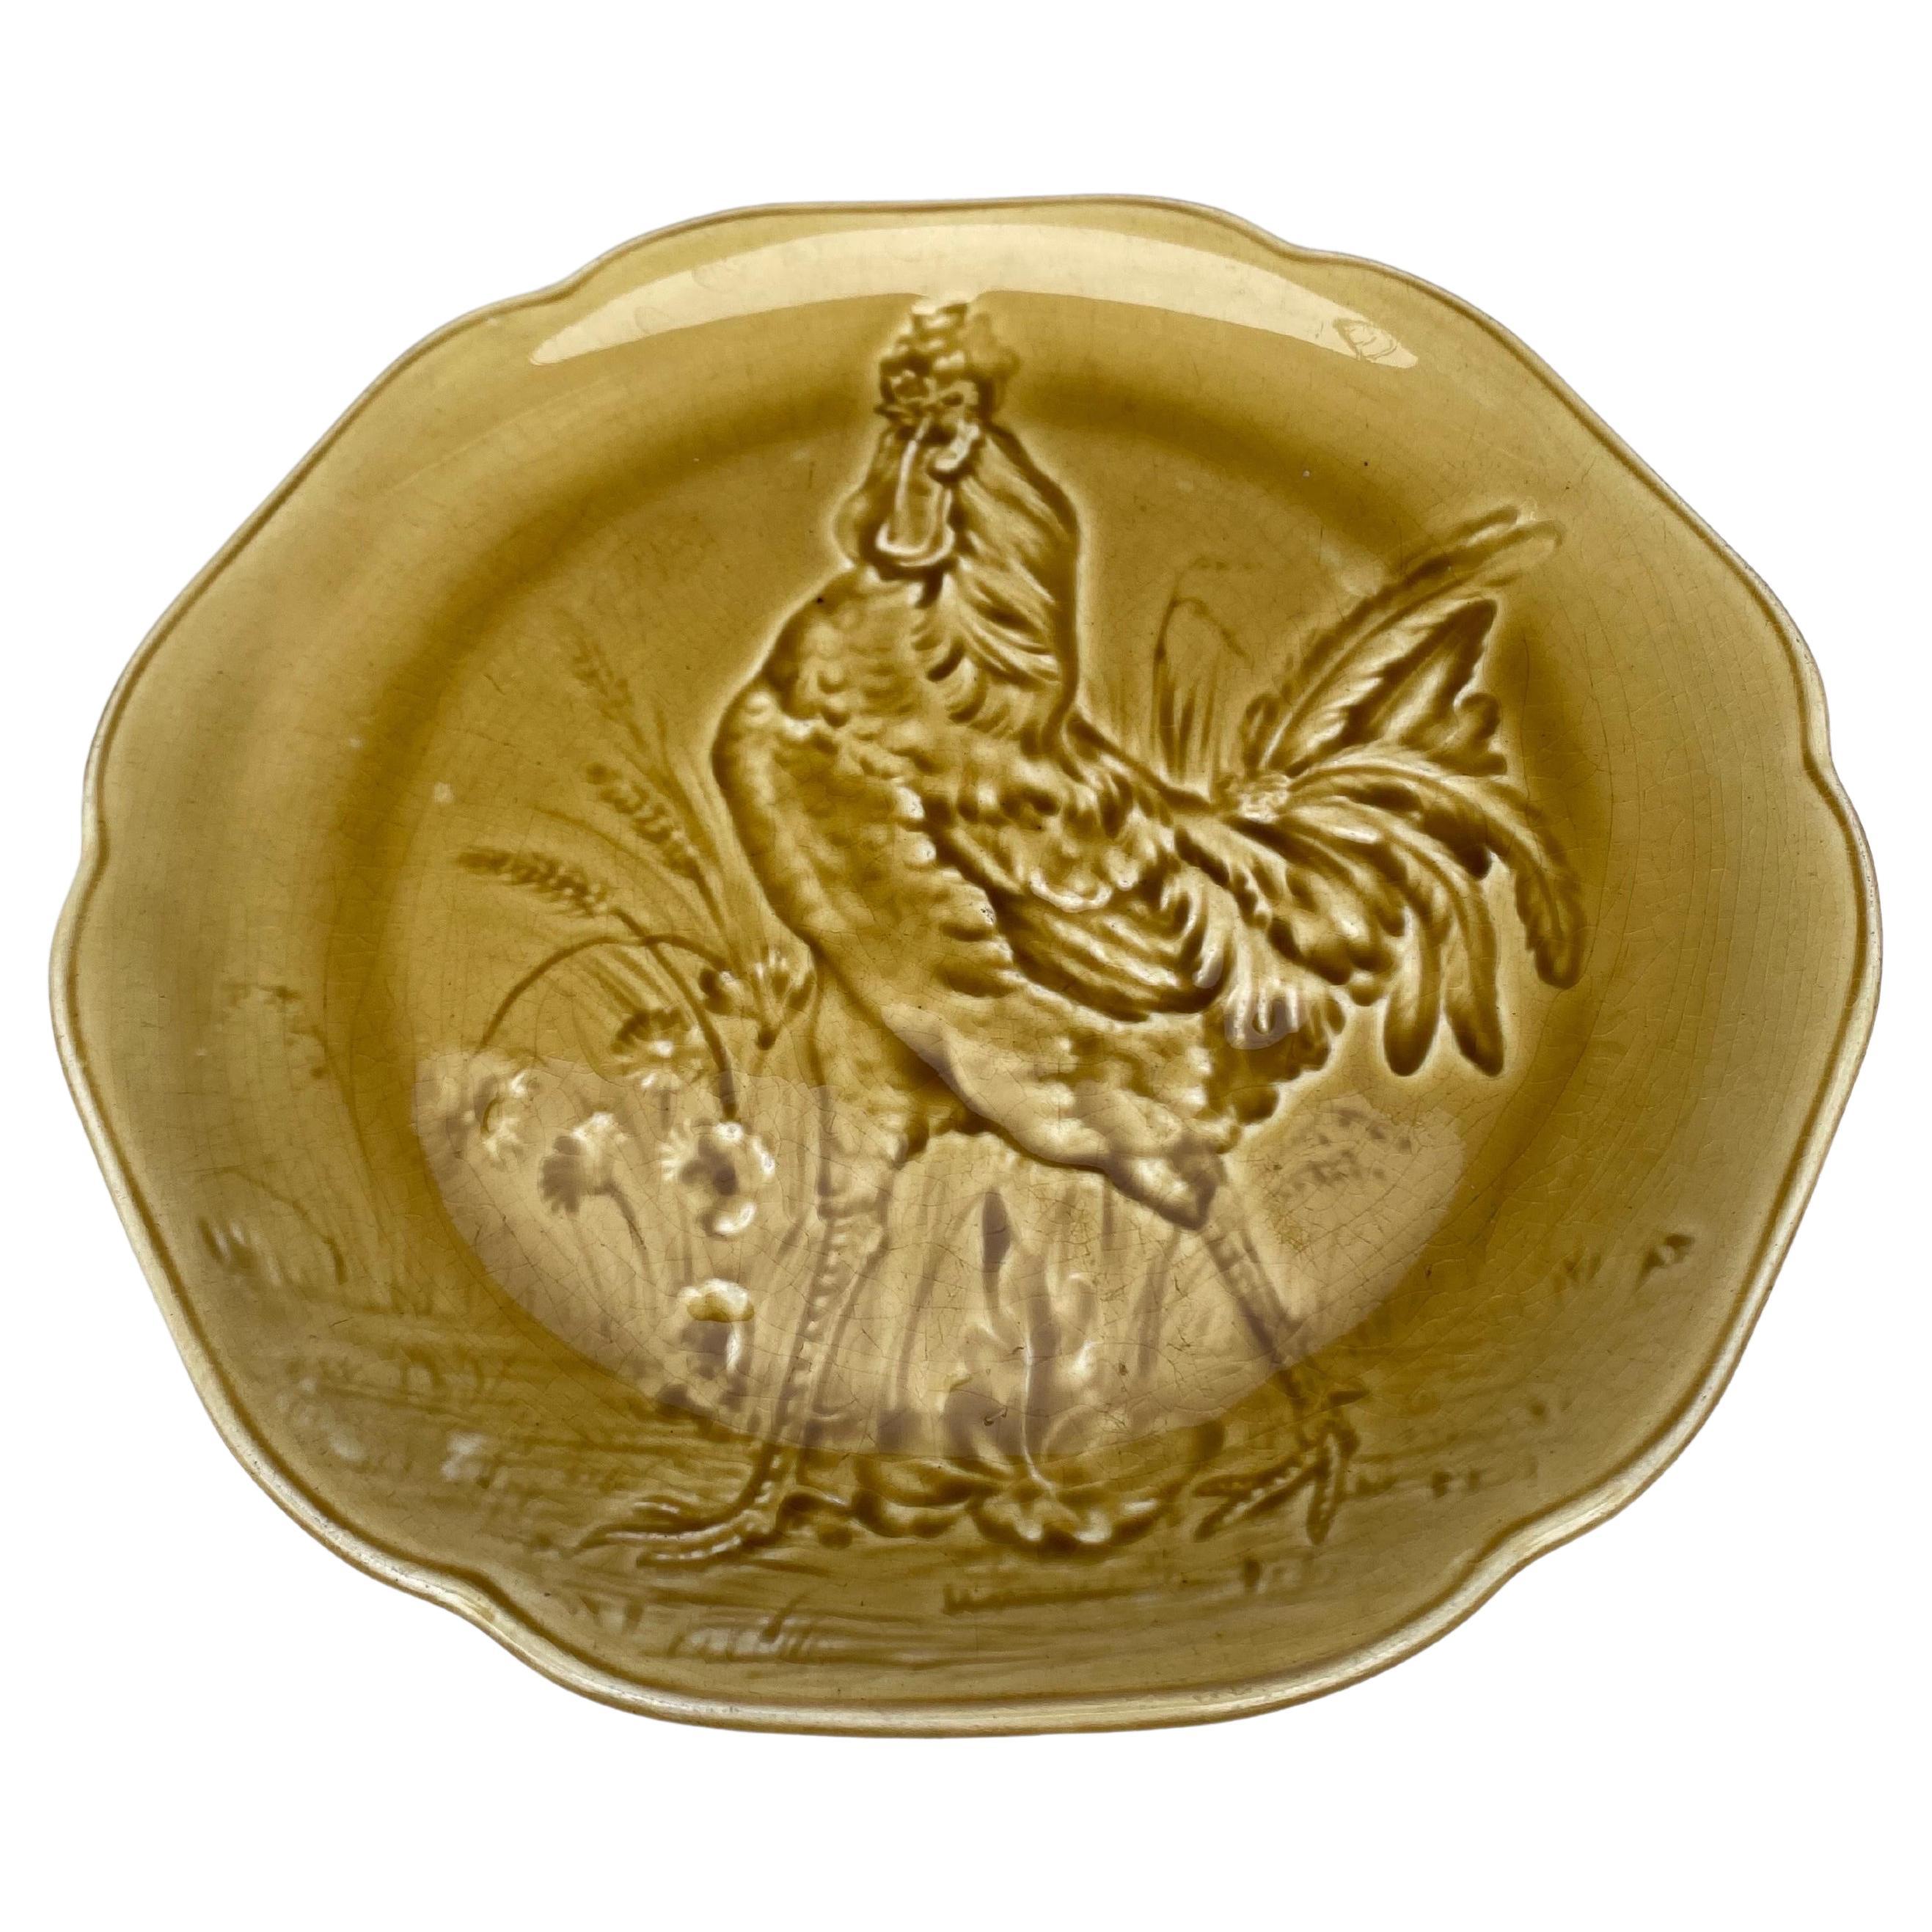 Lovely yellow Majolica plate with rooster signed Hippolyte Boulenger Choisy le Roi, circa 1890.
The manufacture of Choisy le Roi was one of the most important manufacture at the end of 19th century, they produced very high quality ceramics of all